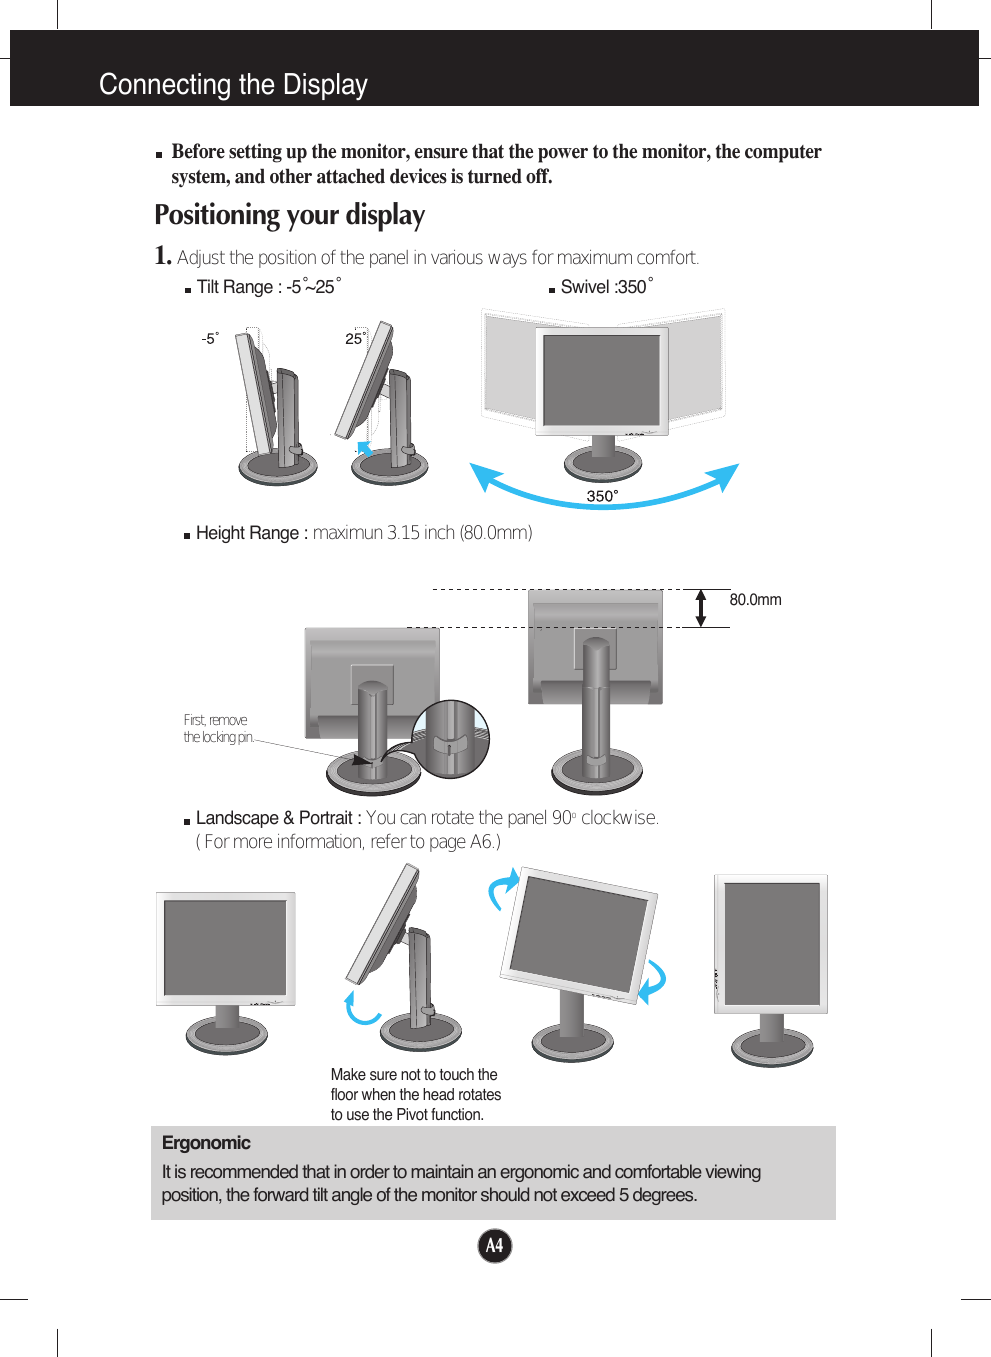 A4Connecting the DisplayBefore setting up the monitor, ensure that the power to the monitor, the computersystem, and other attached devices is turned off. Positioning your display1. Adjust the position of the panel in various ways for maximum comfort.Tilt Range : -5˚~25˚                             Swivel :350˚ErgonomicIt is recommended that in order to maintain an ergonomic and comfortable viewingposition, the forward tilt angle of the monitor should not exceed 5 degrees.Height Range : maximun 3.15 inch (80.0mm)Landscape &amp; Portrait : You can rotate the panel 90o  clockwise. ( For more information, refer to page A6.)Make sure not to touch thefloor when the head rotatesto use the Pivot function.80.0mmFirst, remove the locking pin.